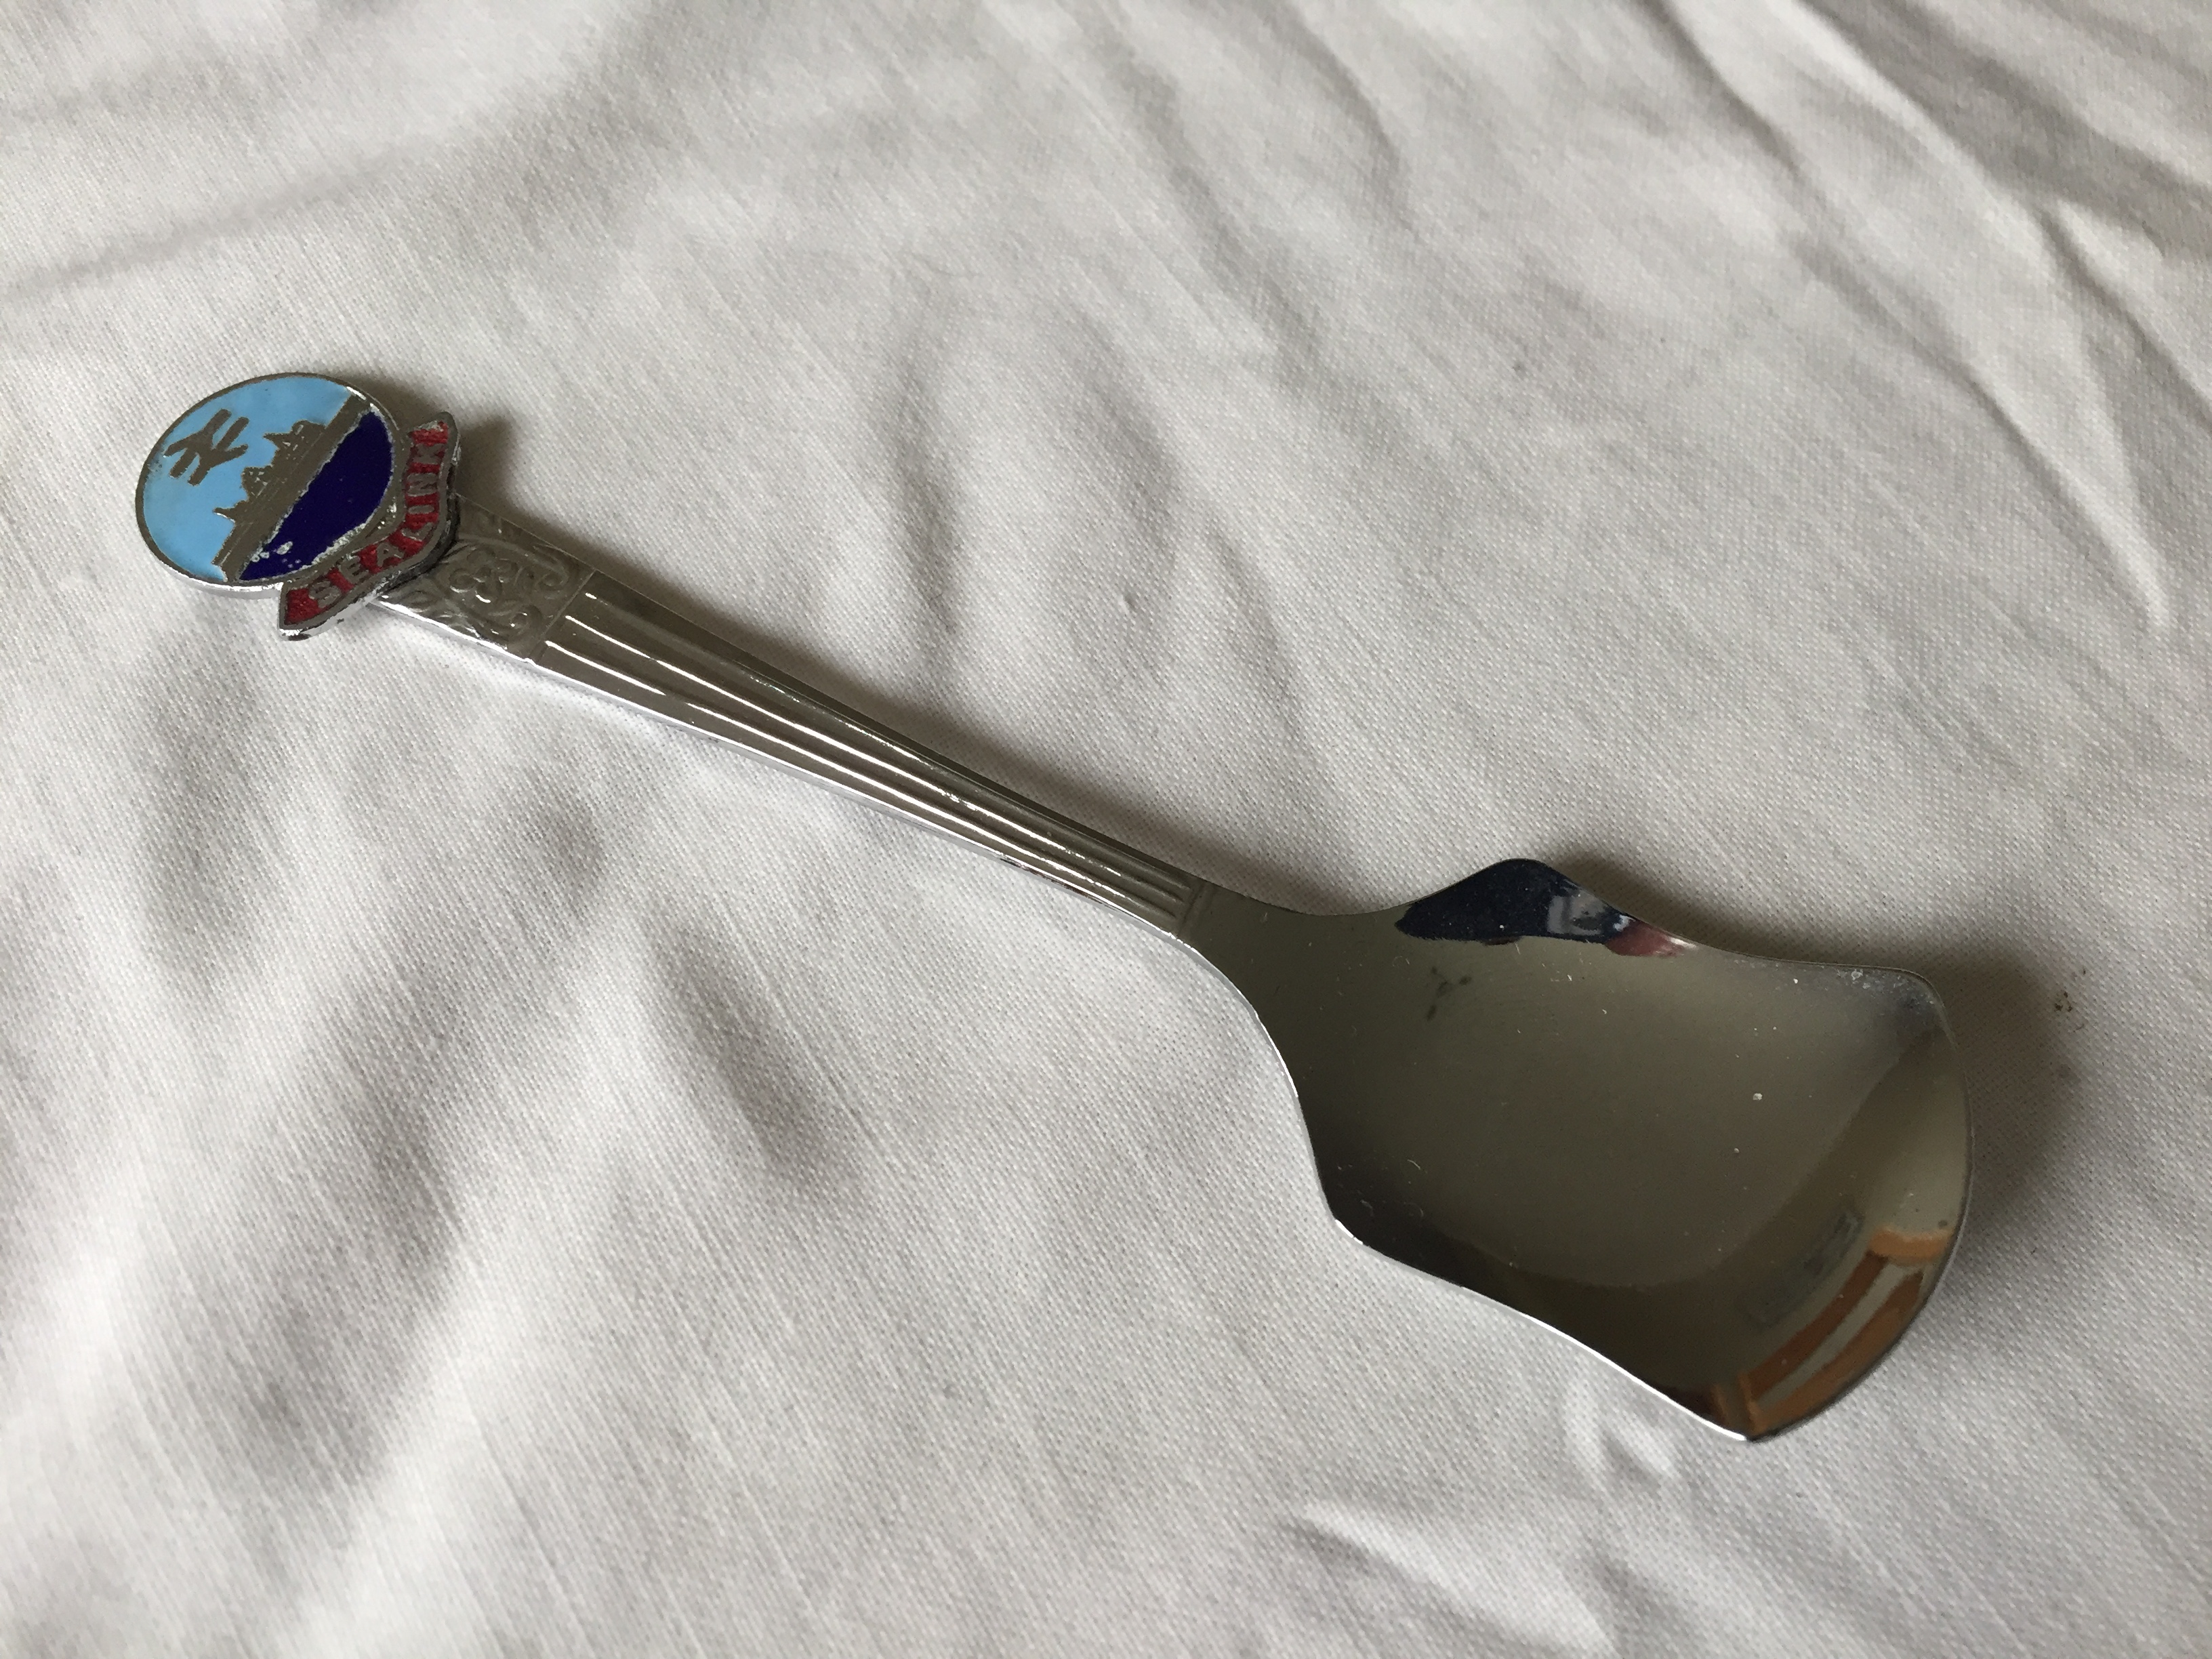 EARLY SOUVENIR SPOON FROM THE SEALINK FERRY CROSSING SERVICE 